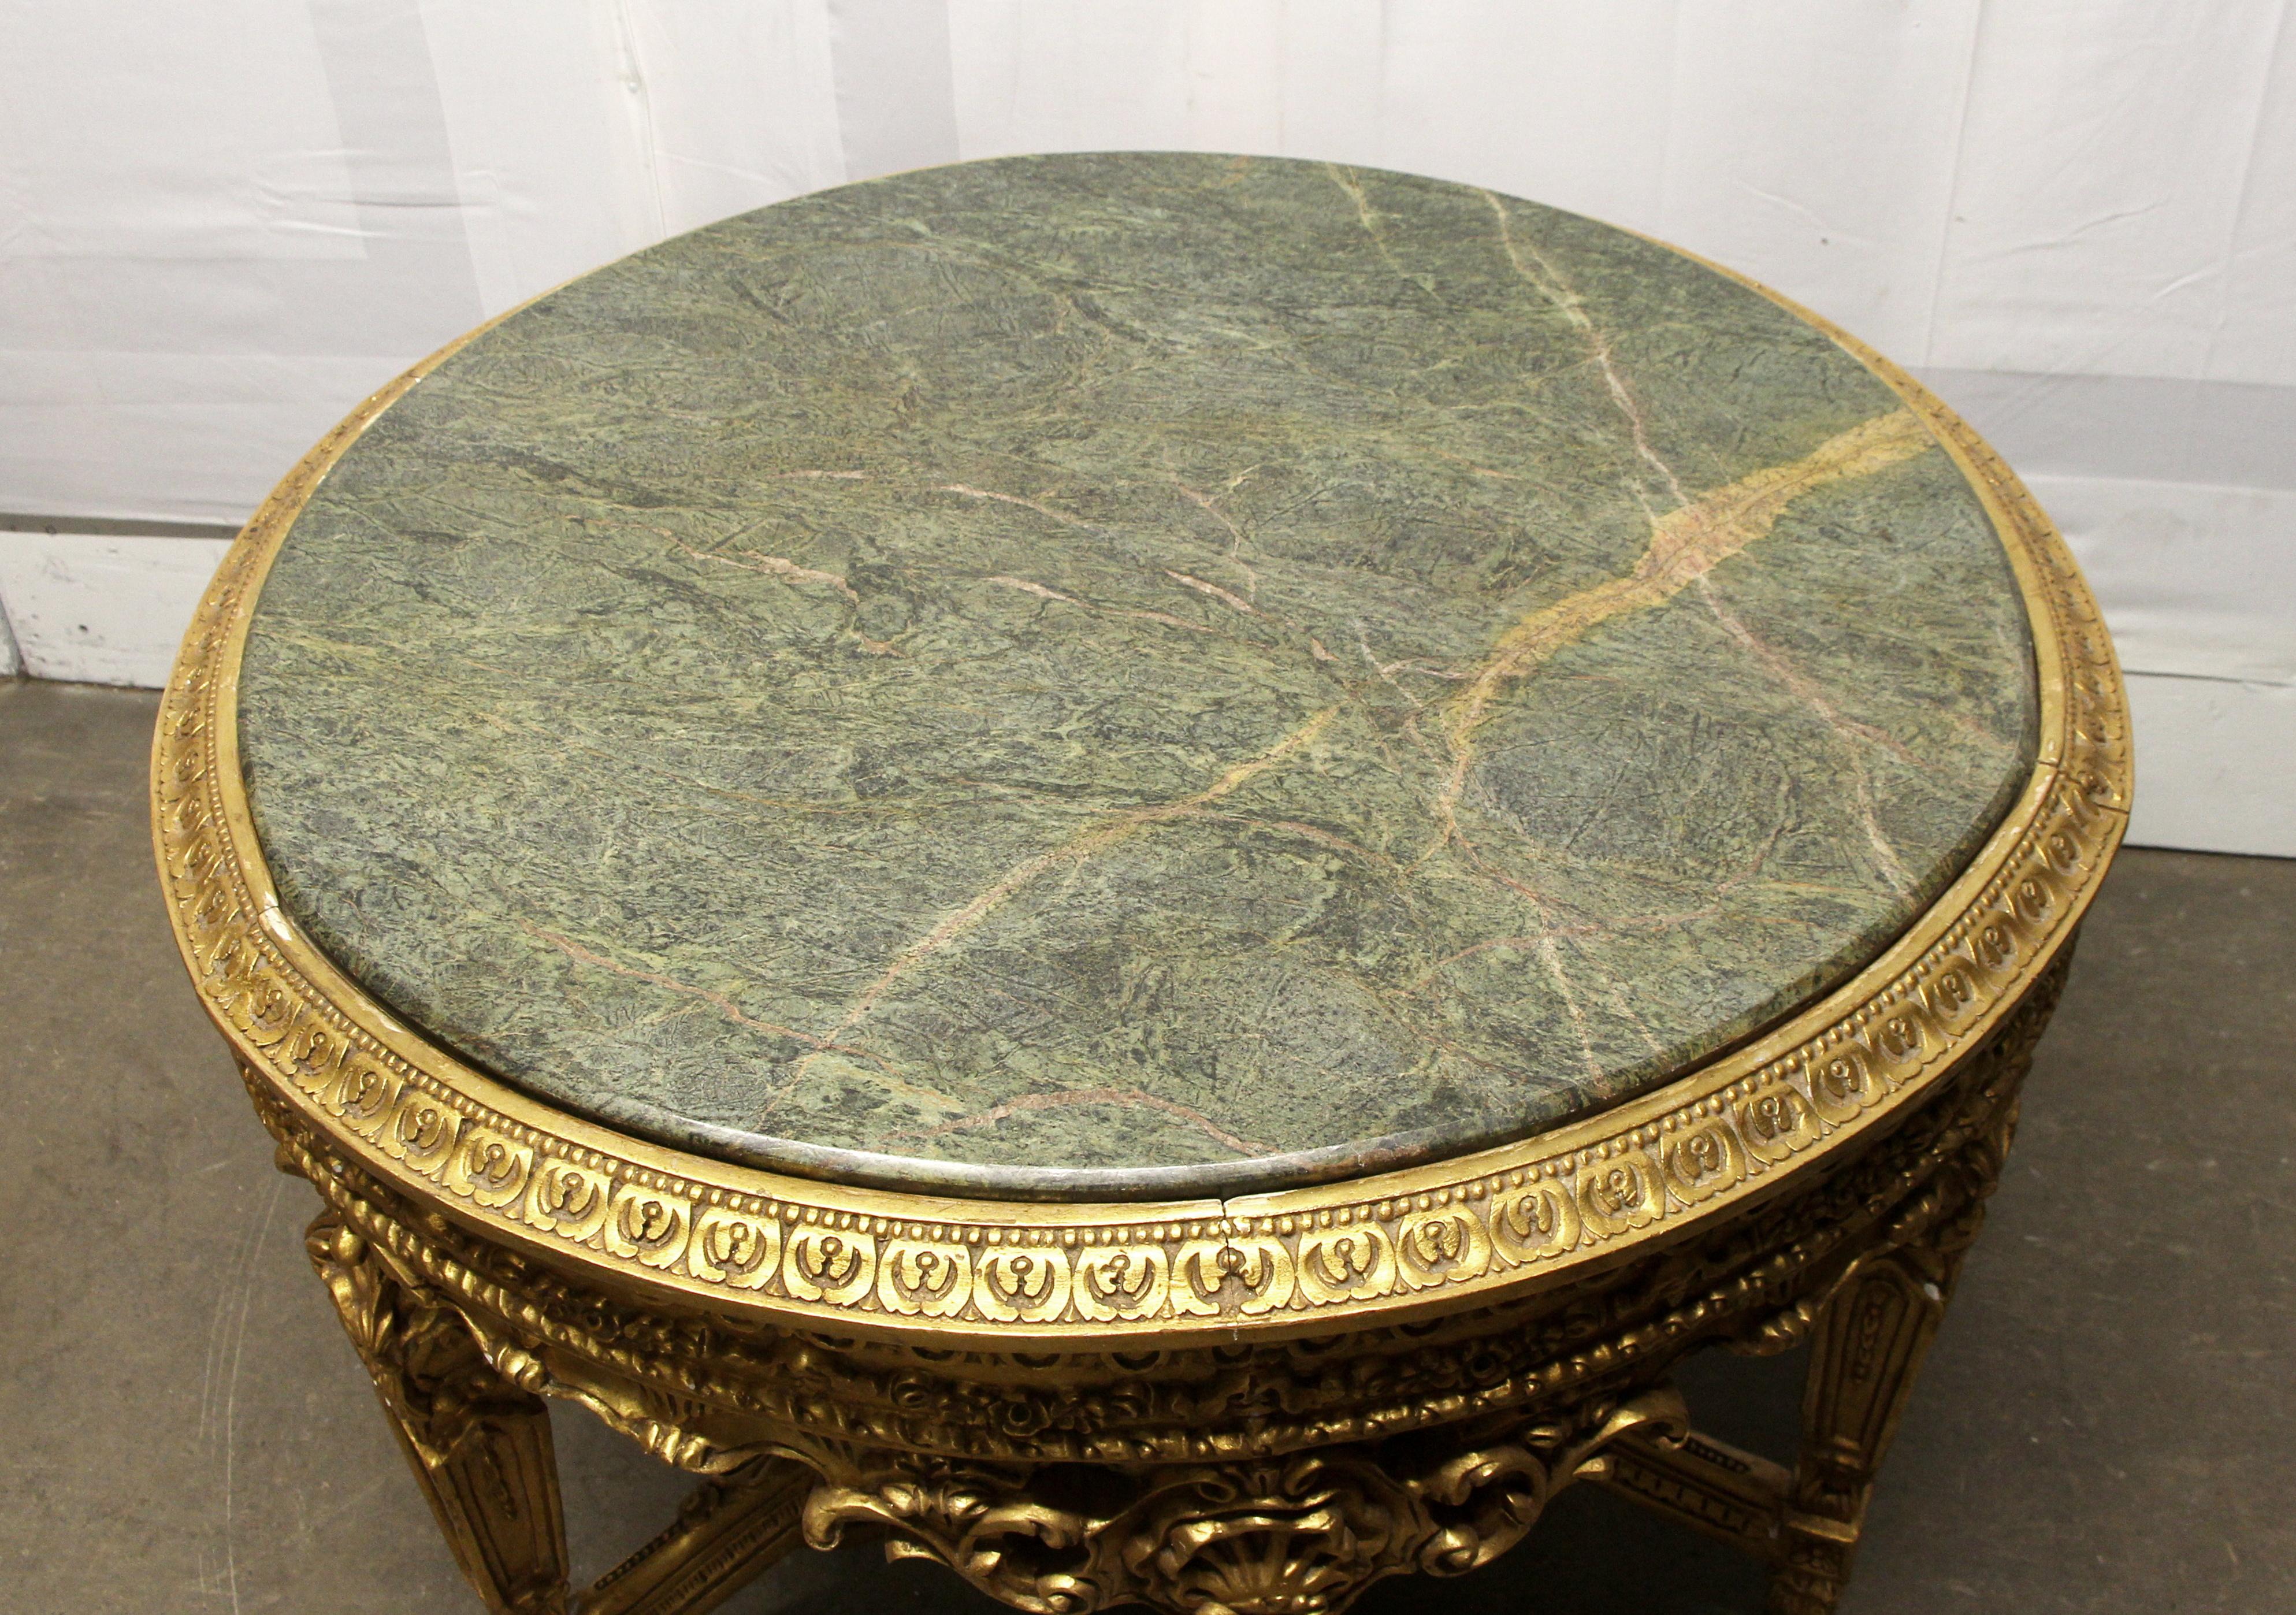 1980s French round table done in the style of Louis XVI. With a veined green round marble top and a highly ornate carved gilt wood frame. Minor wear due to age and use. This can be seen at our 302 Bowery location in NoHo in Manhattan.